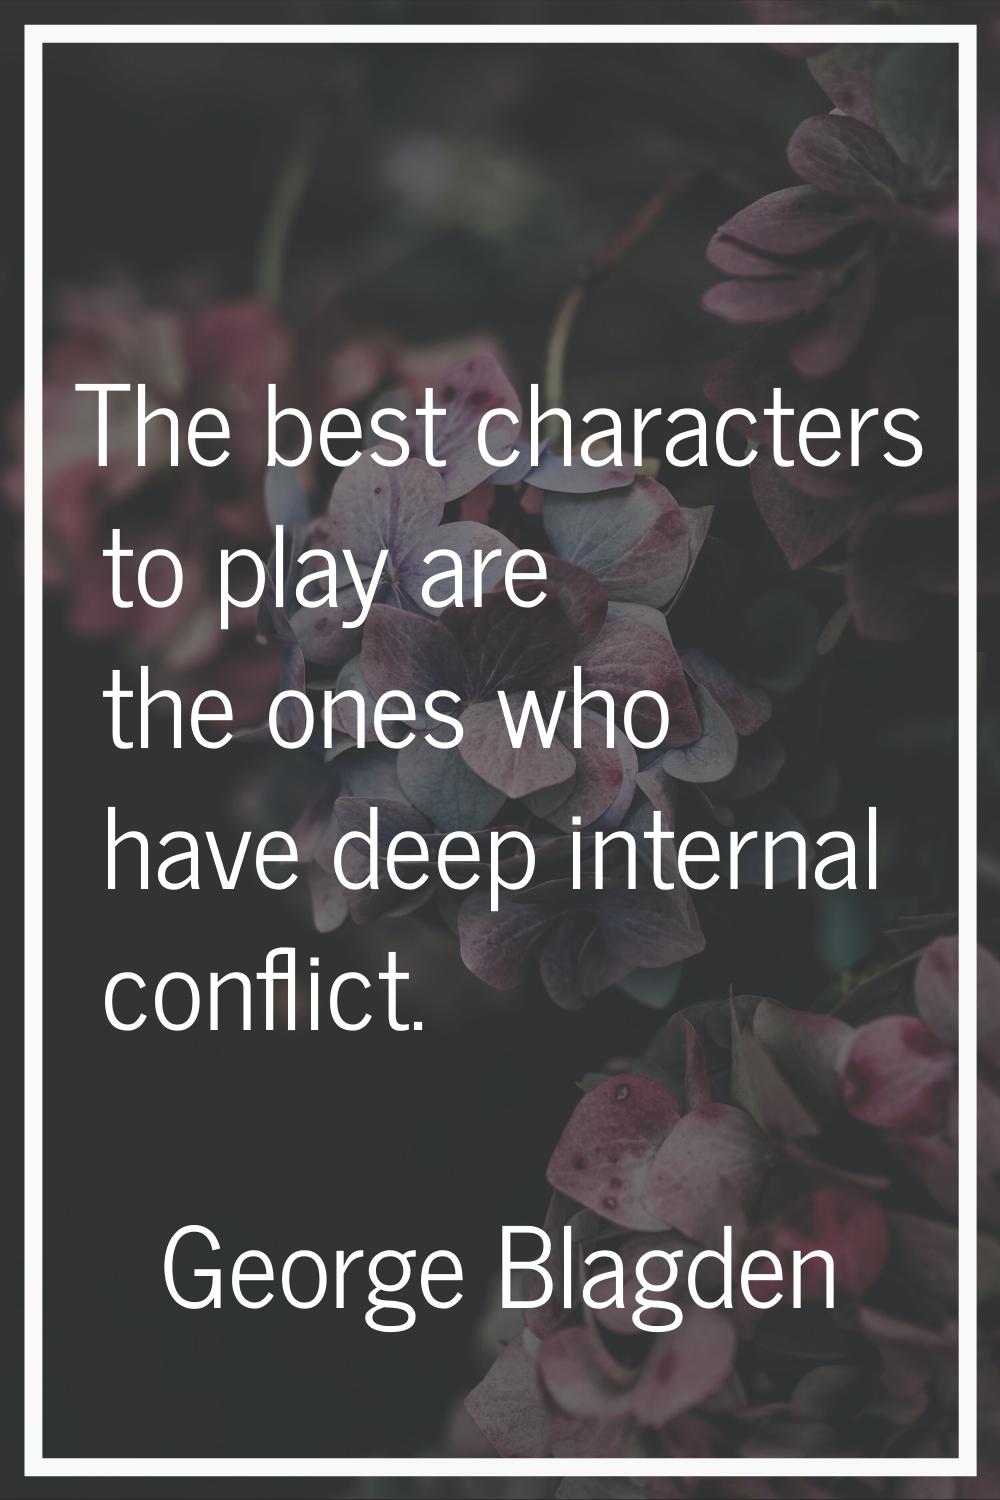 The best characters to play are the ones who have deep internal conflict.